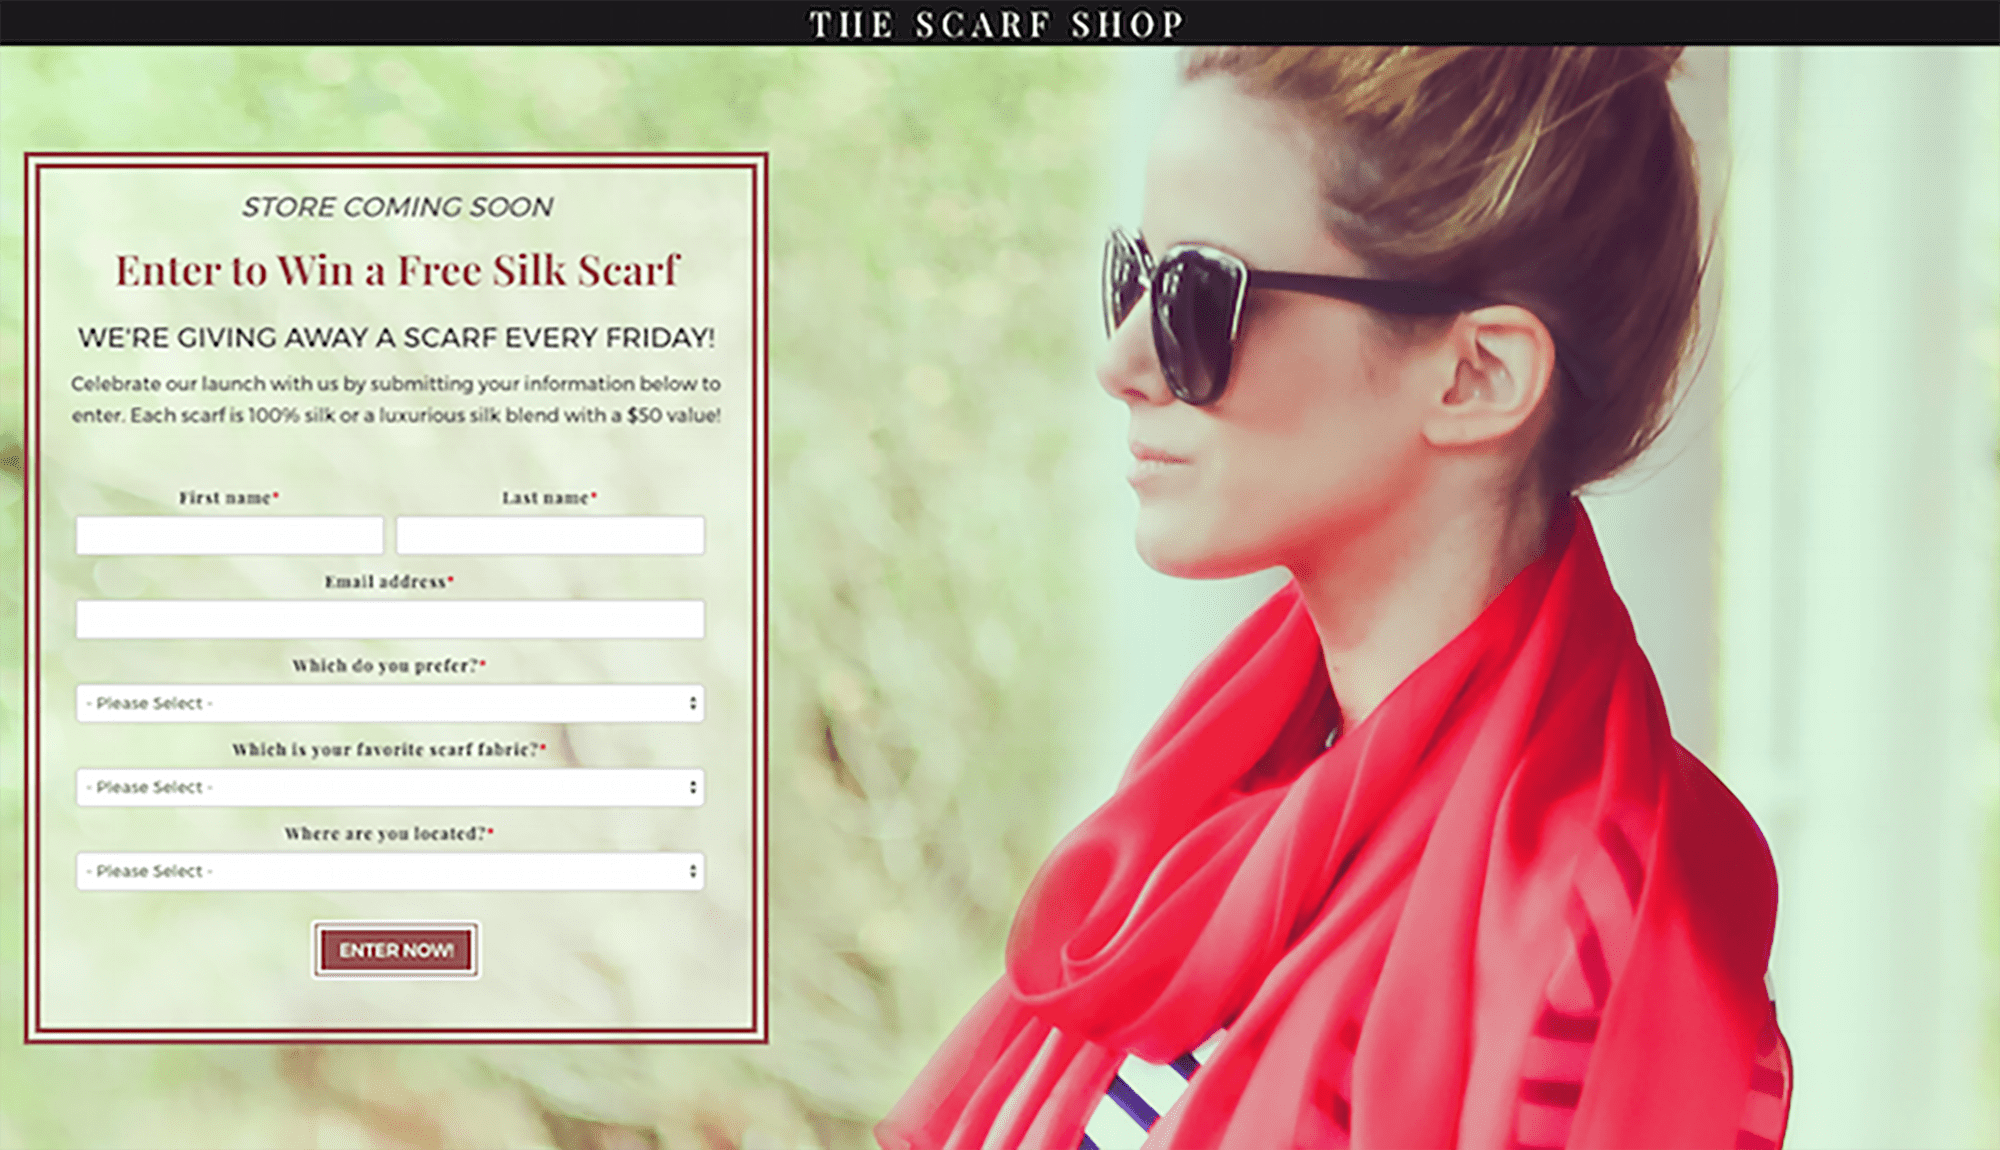 The Scarf Shop landing page